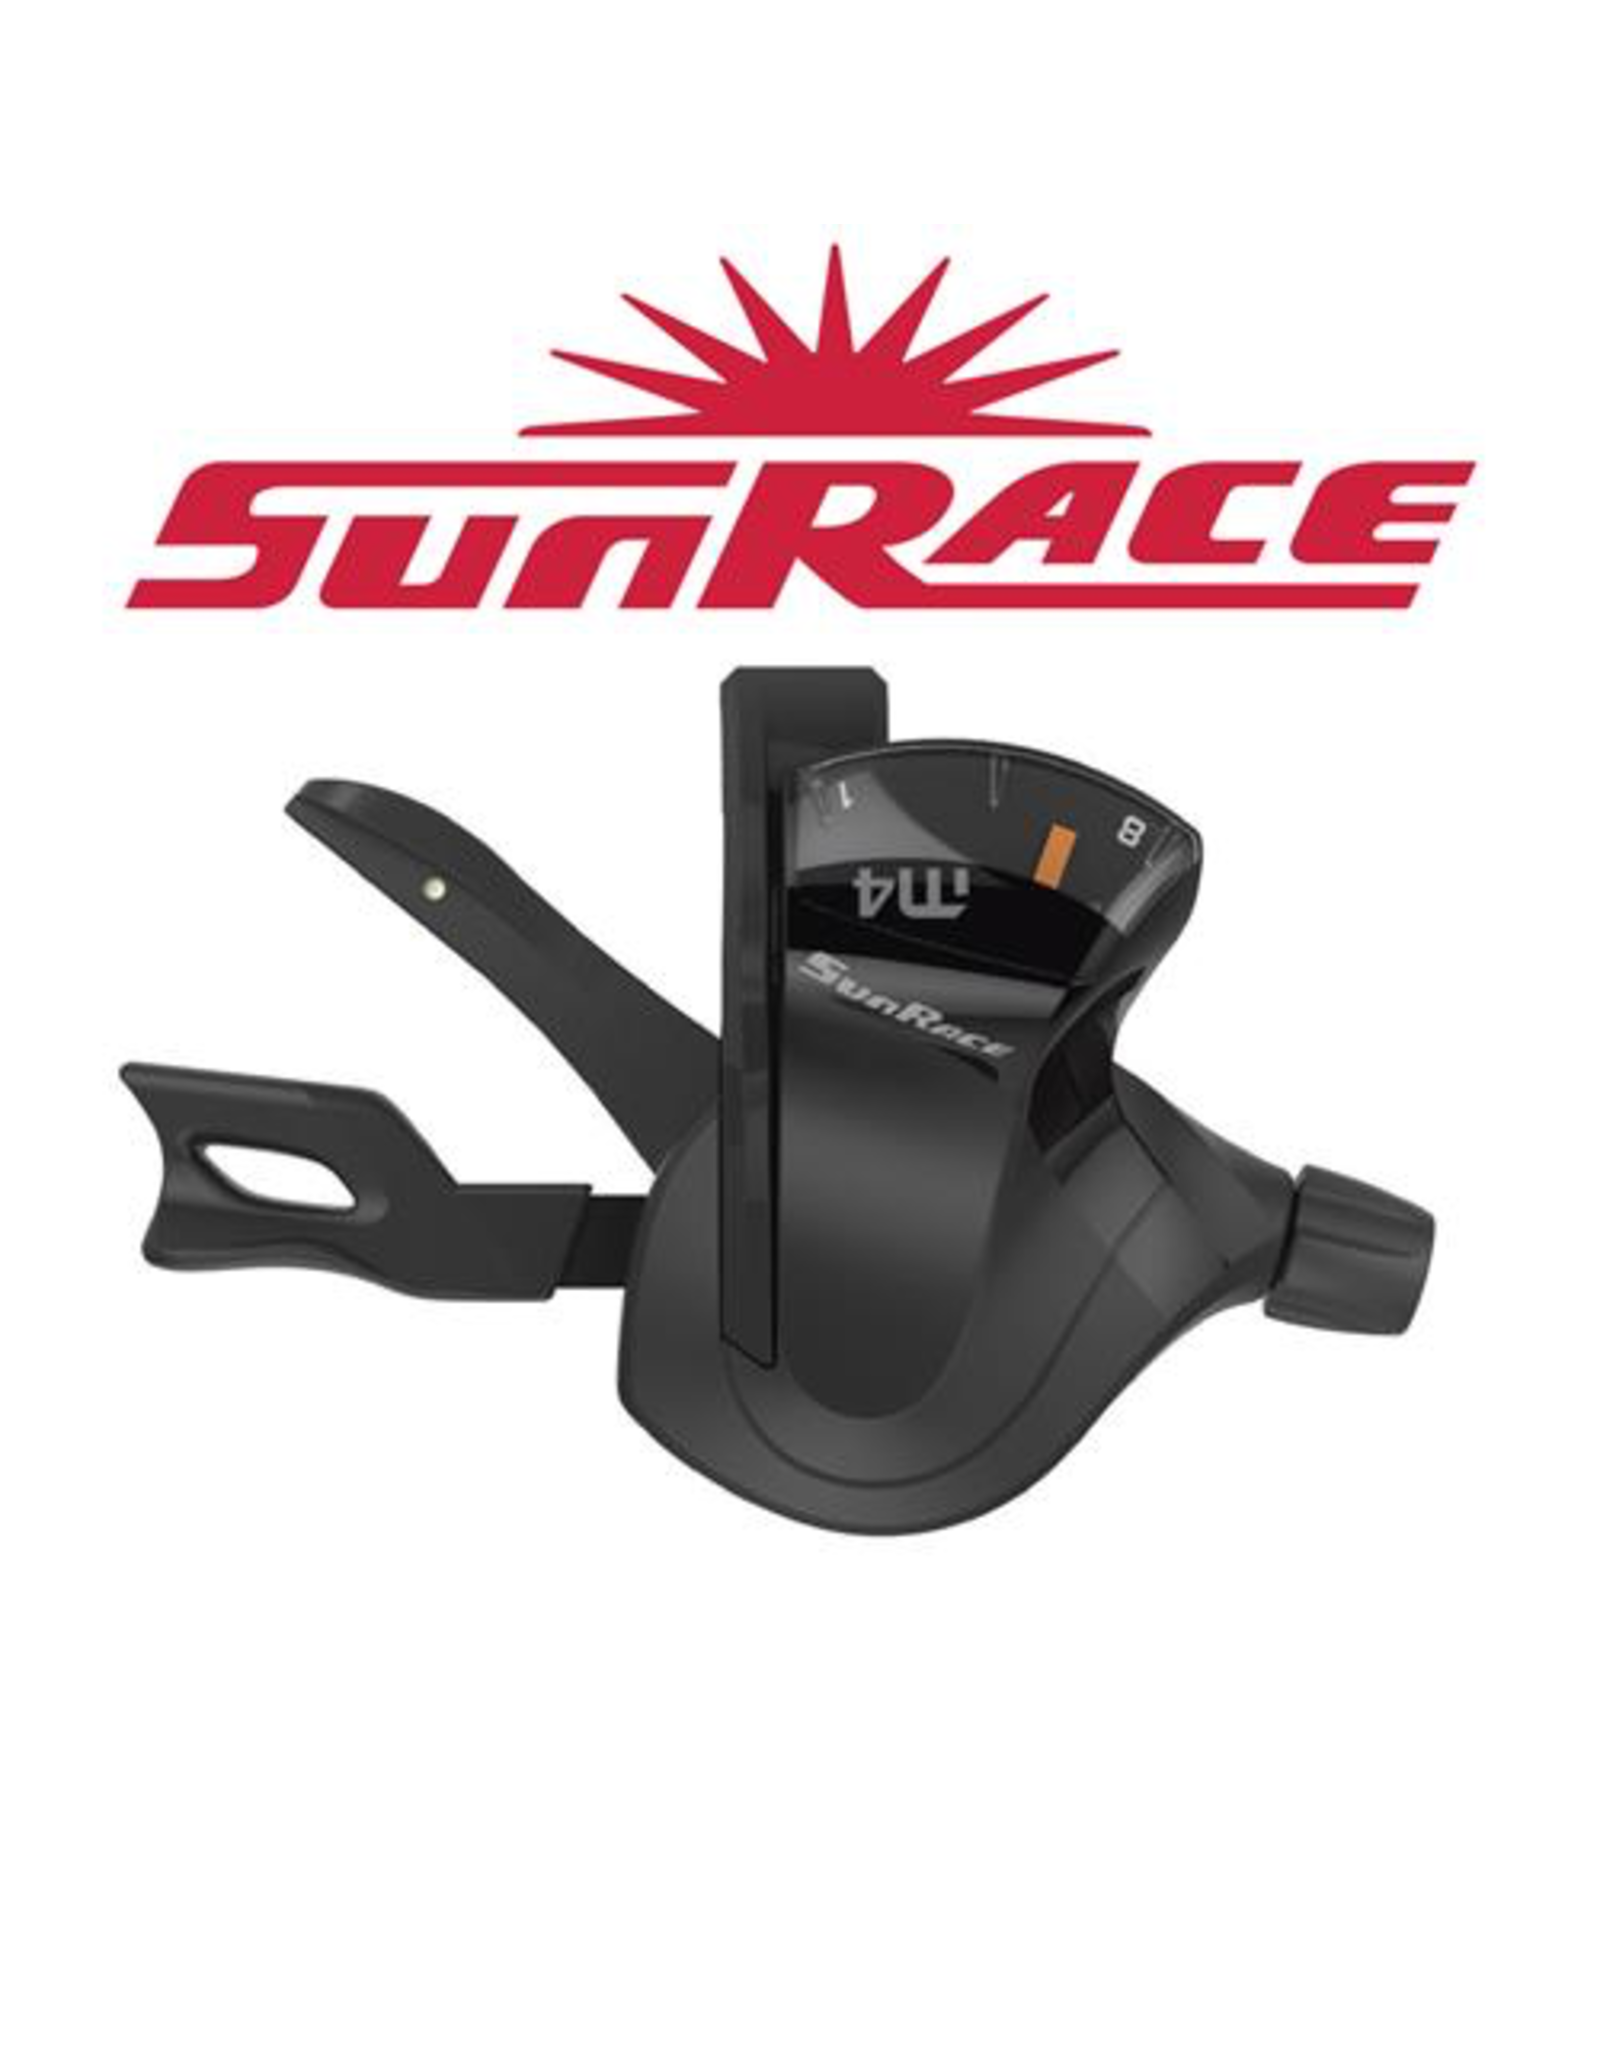 SUNRACE SUNRACE DLM400 RIGHT 8 SPEED SHIFT LEVER